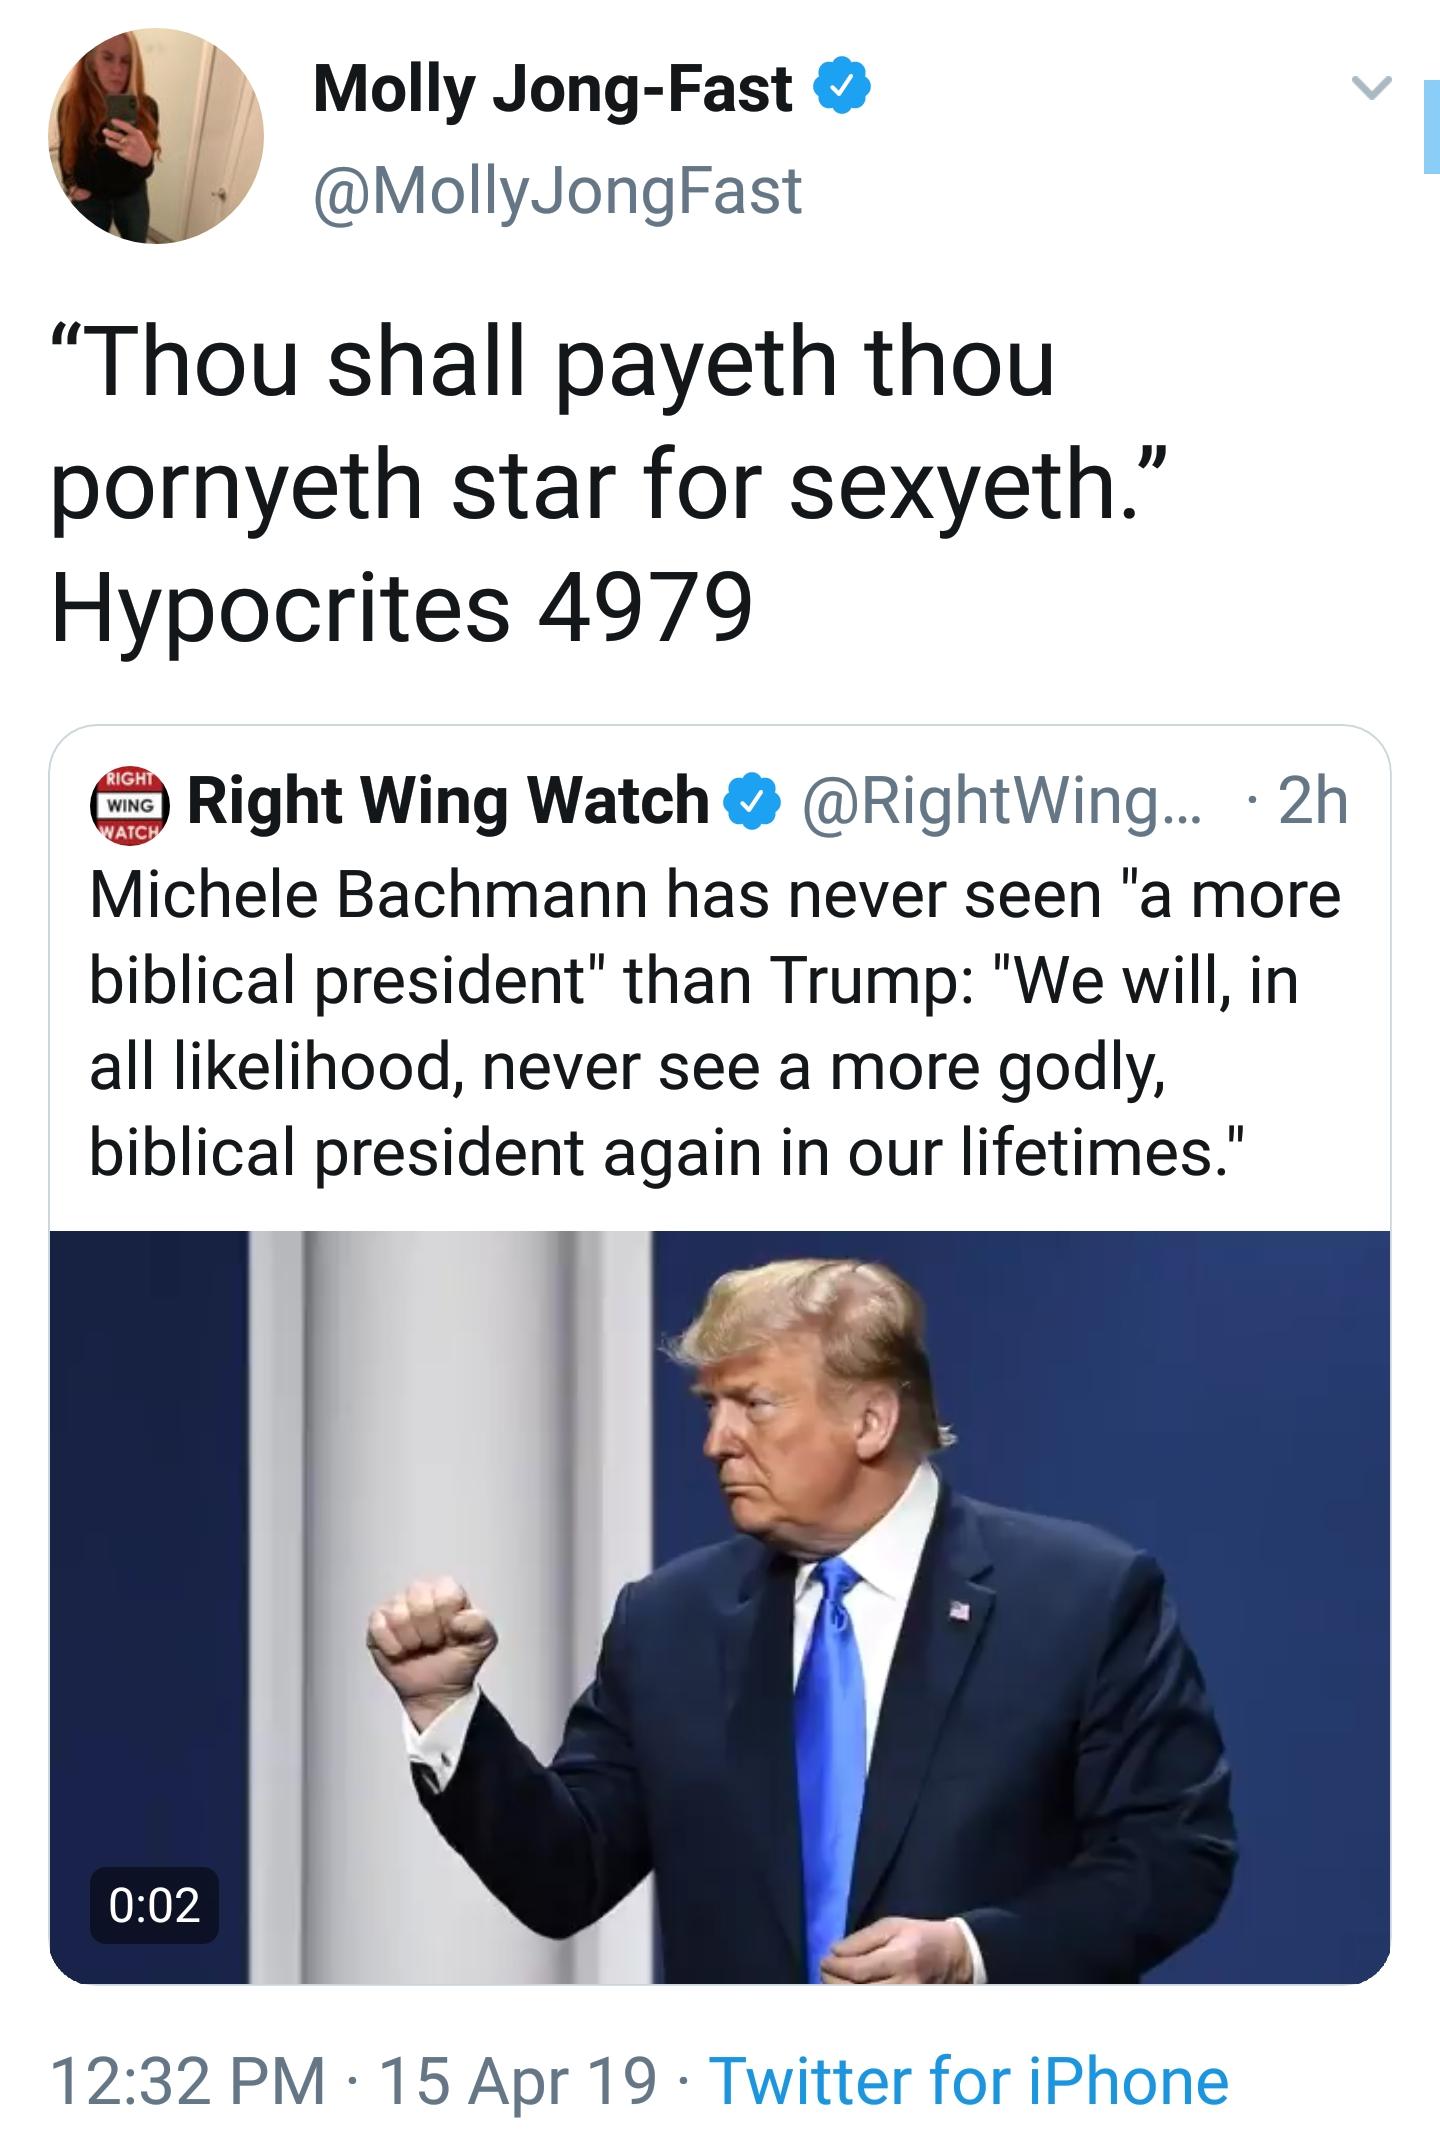 conversation - Molly JongFast Thou shall payeth thou pornyeth star for sexyeth. Hypocrites 4979 Right Wing Watci Right Wing Watch ... 2h Michele Bachmann has never seen "a more biblical president" than Trump "We will, in all lihood, never see a more godly